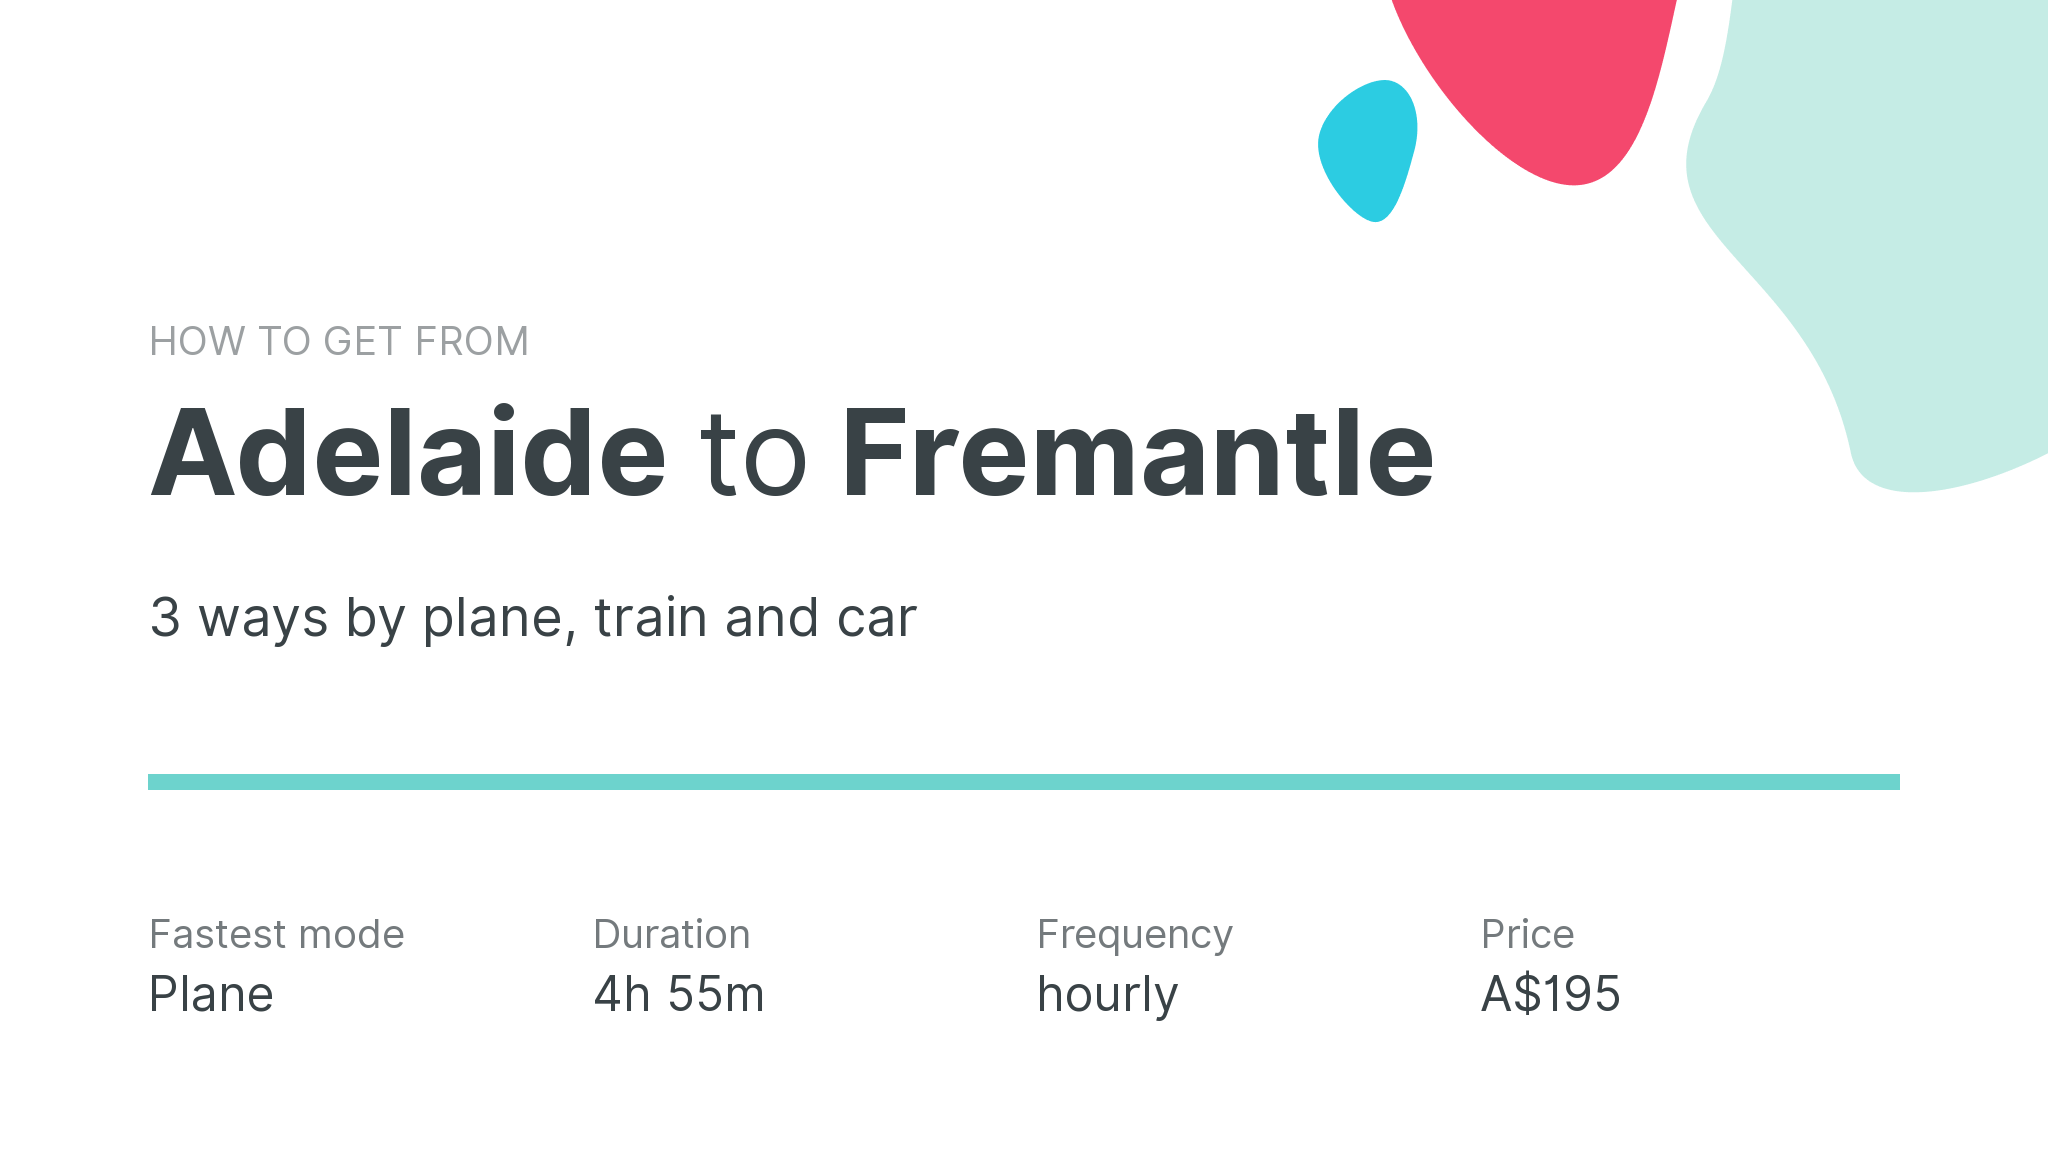 How do I get from Adelaide to Fremantle